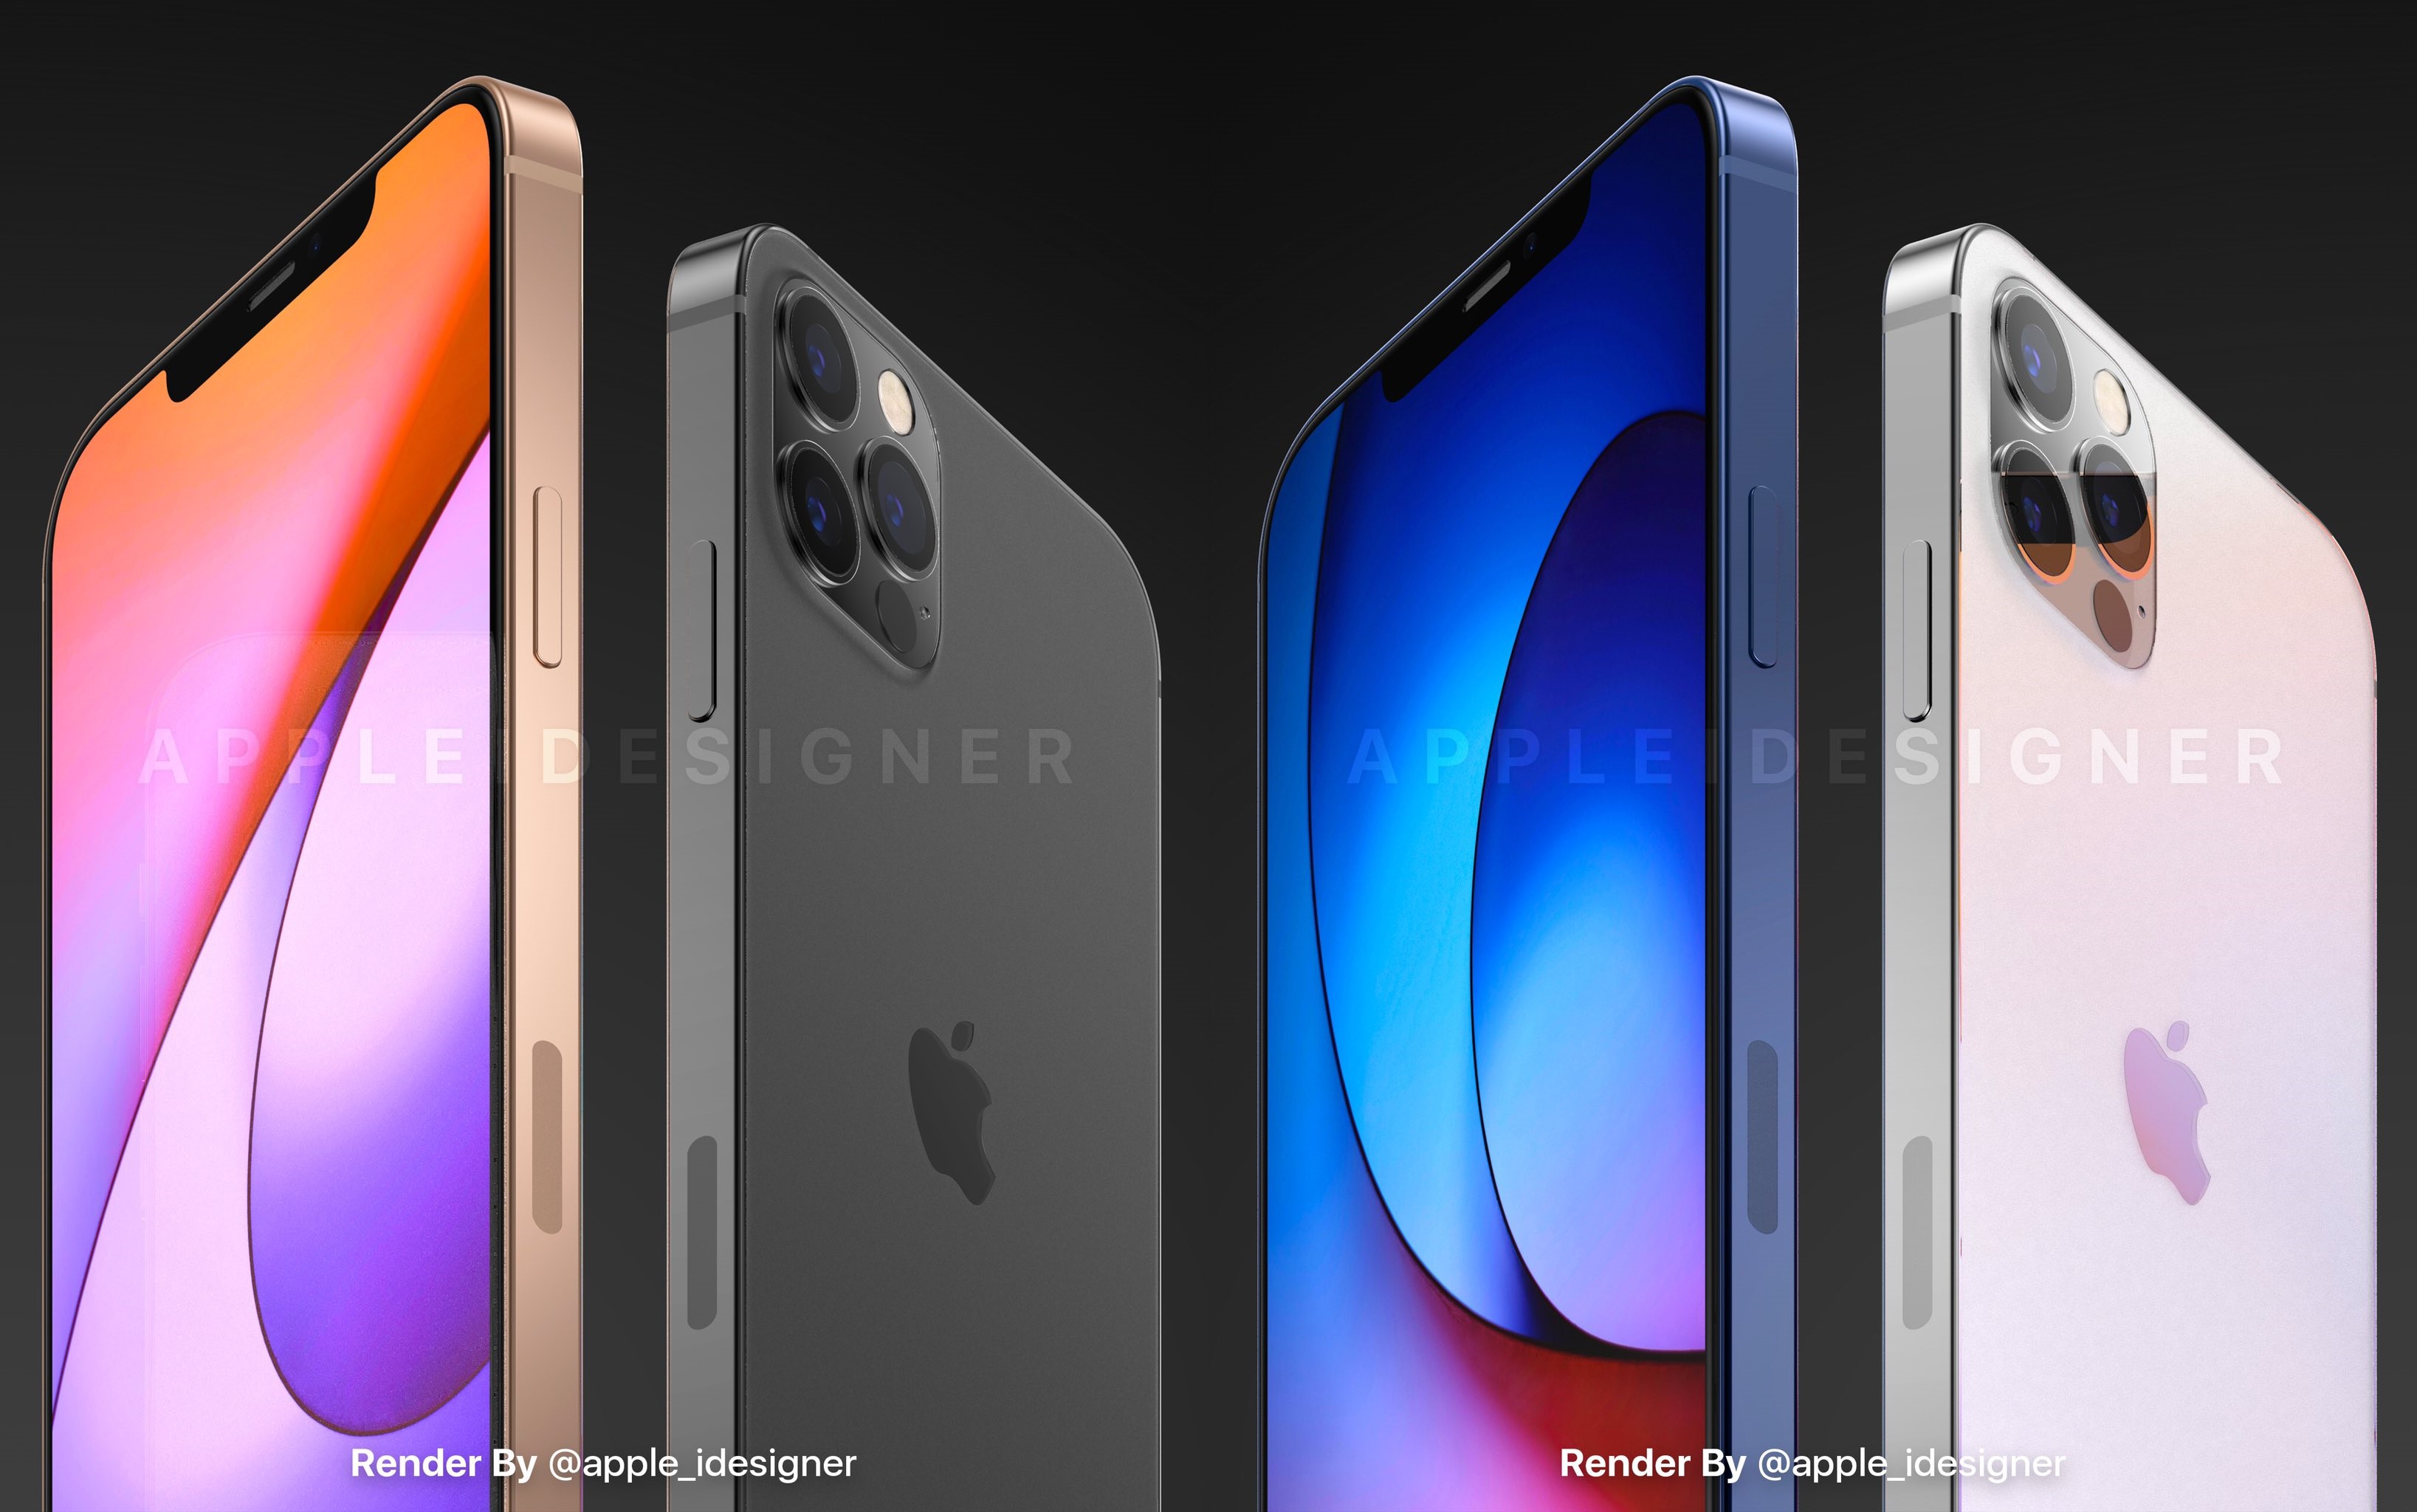 Massive iPhone 12 leak just revealed prices for every model | Tom's Guide